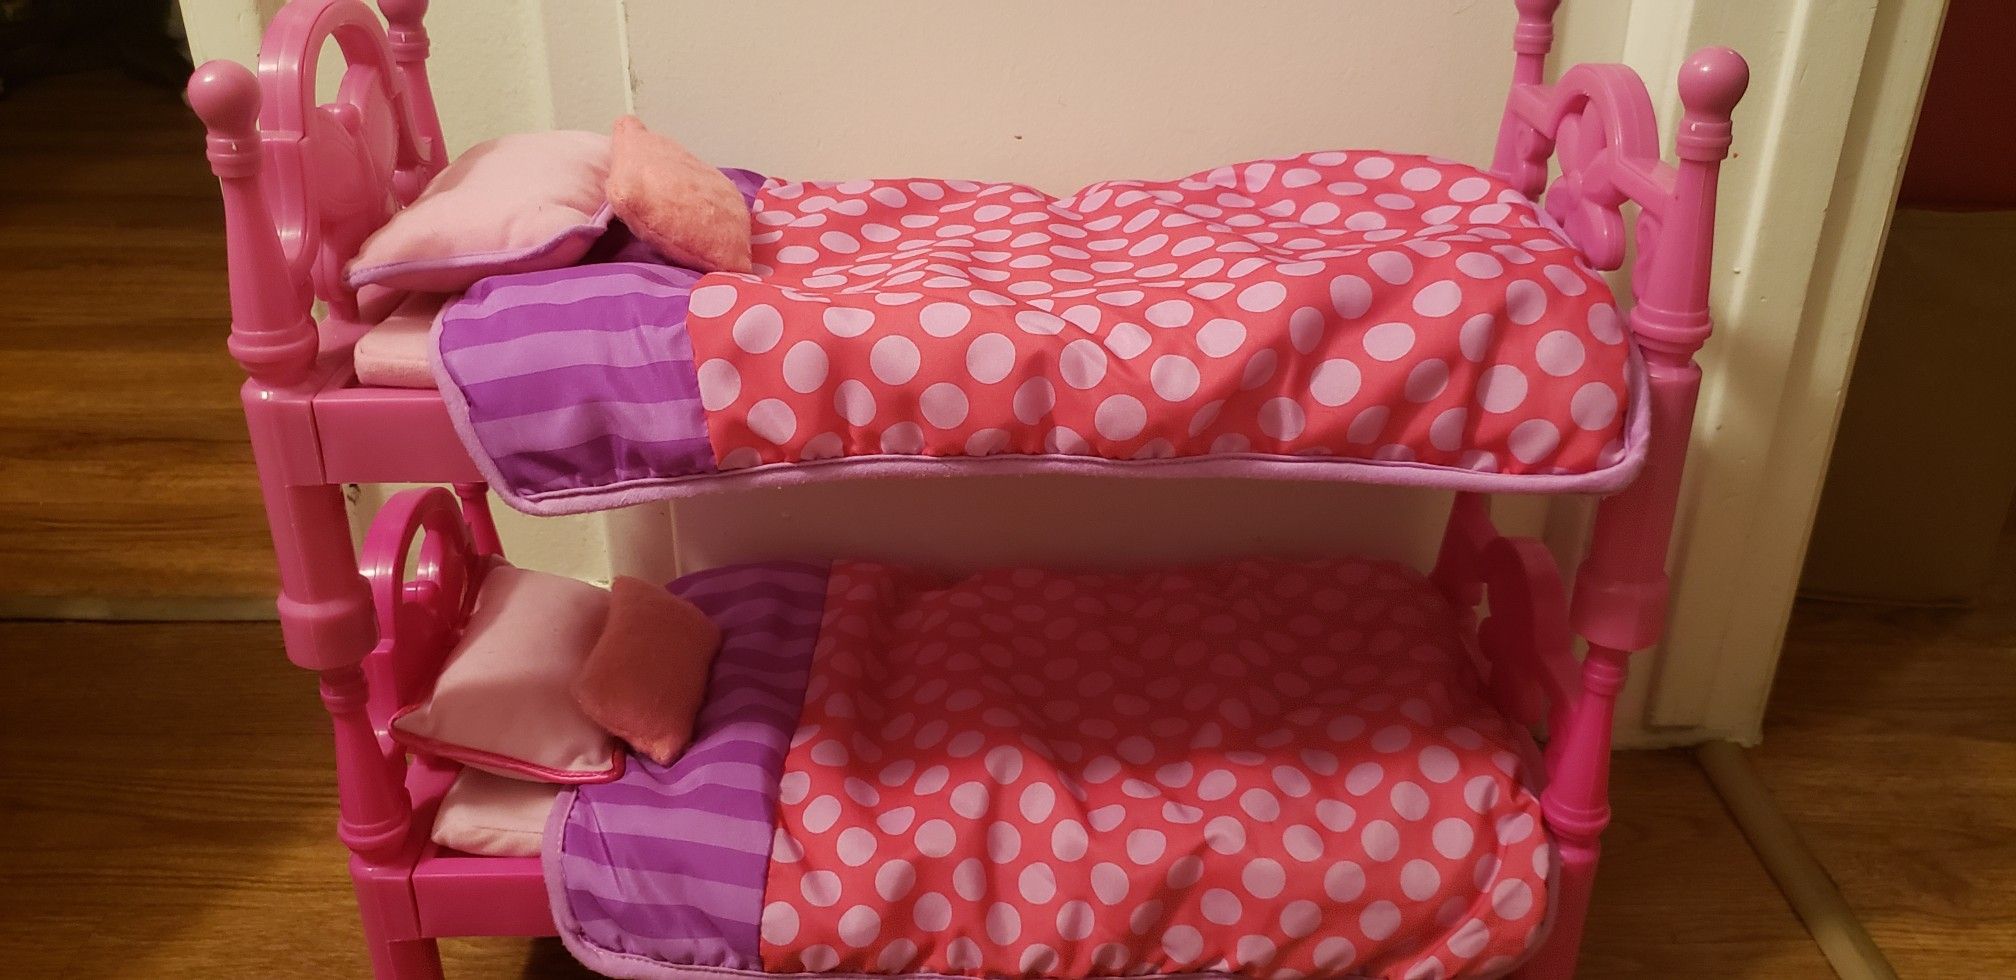 2 doll beds/ bunk beds for 18 inch dolls (American Girl)